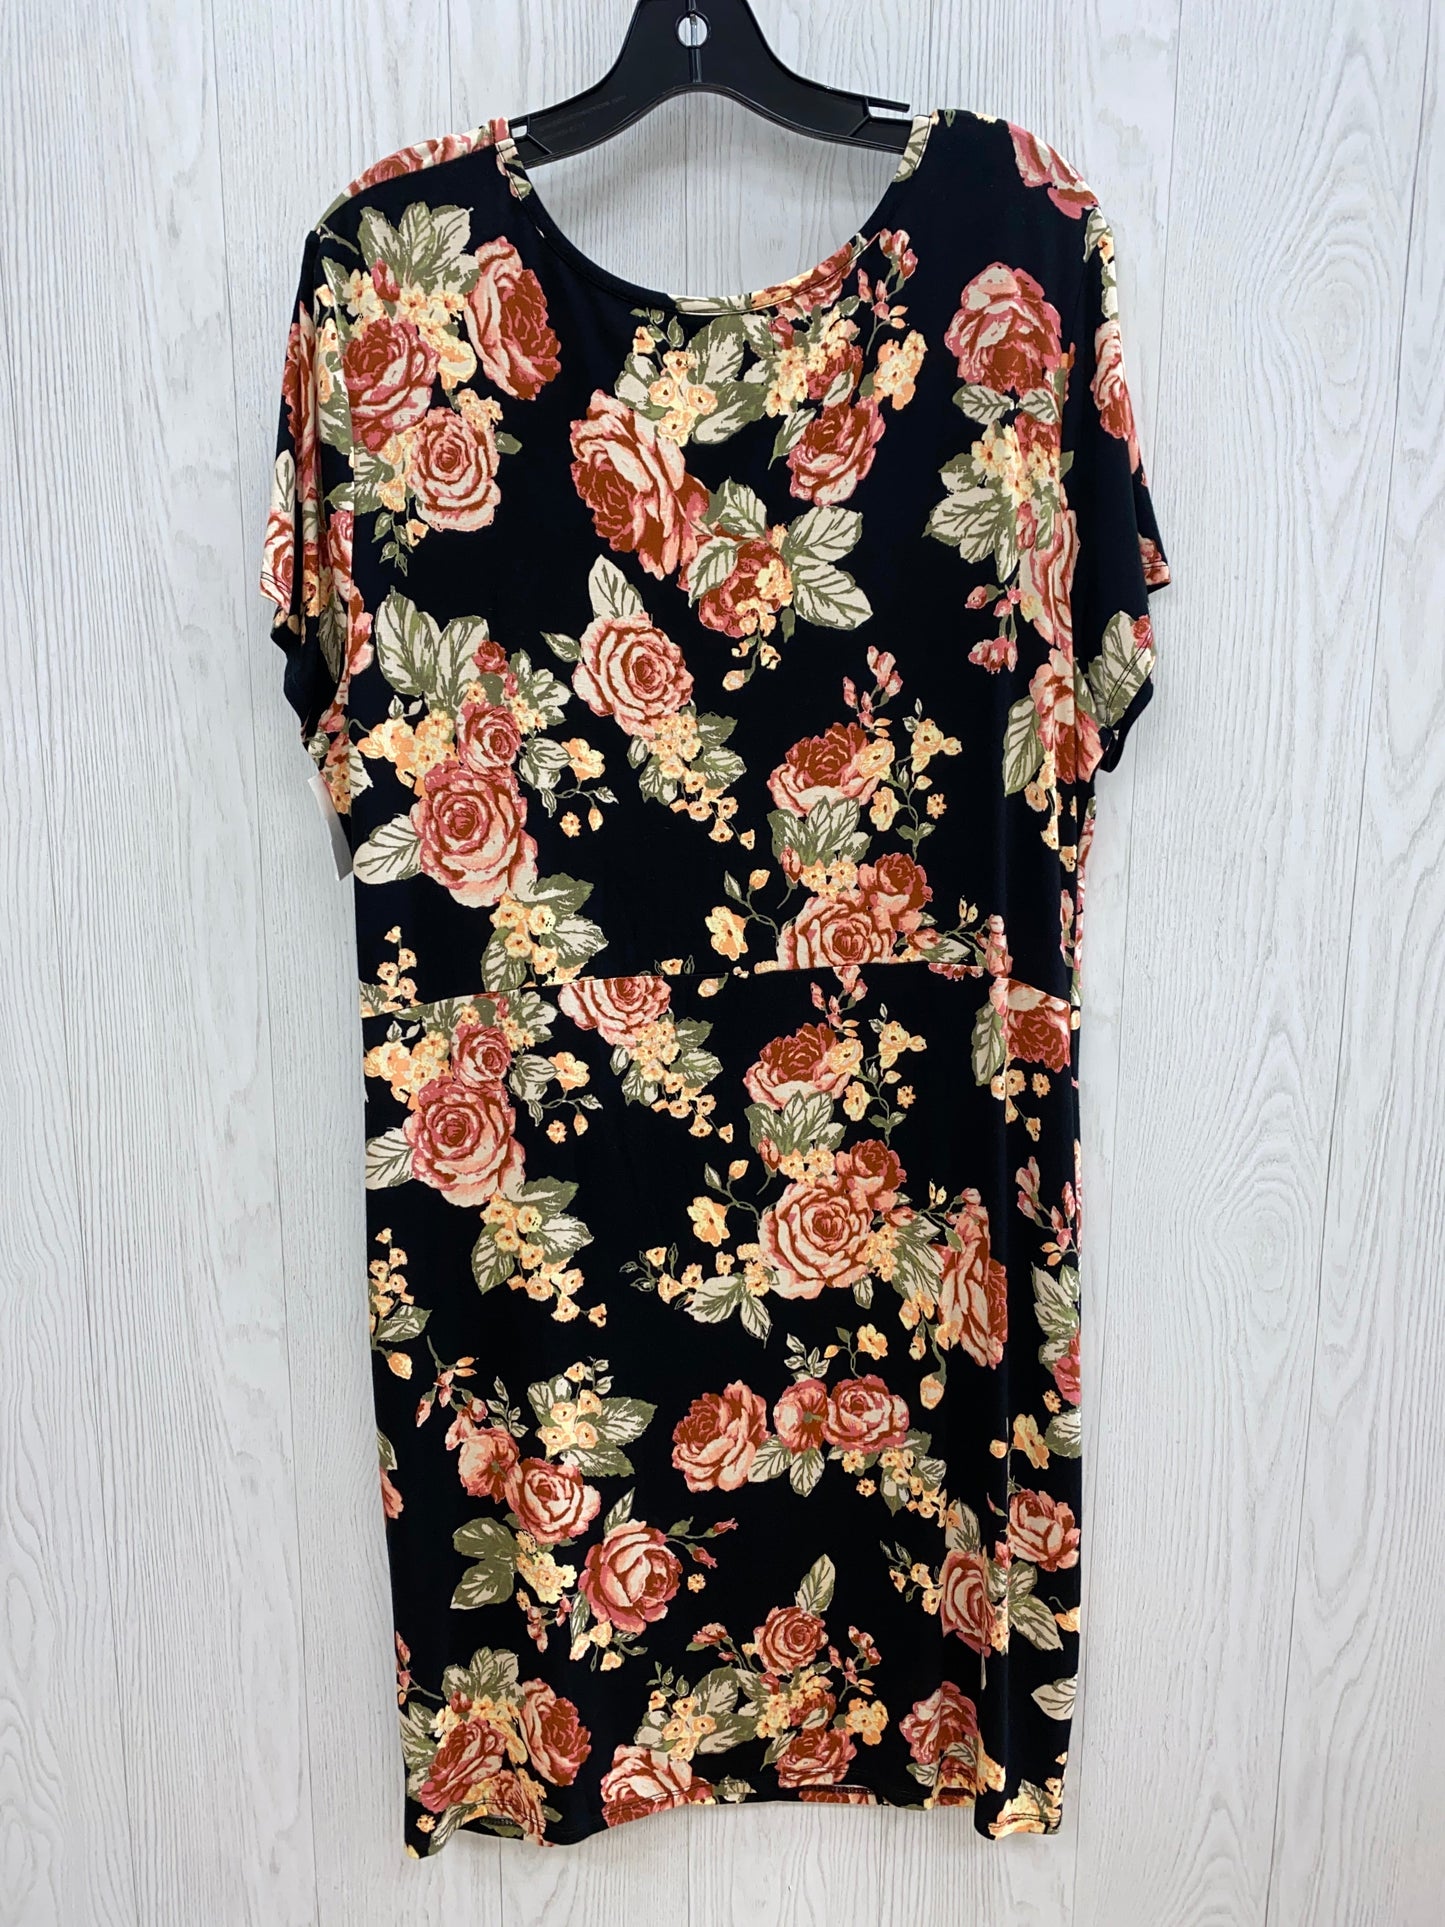 Floral Print Dress Casual Short Maurices, Size Xl